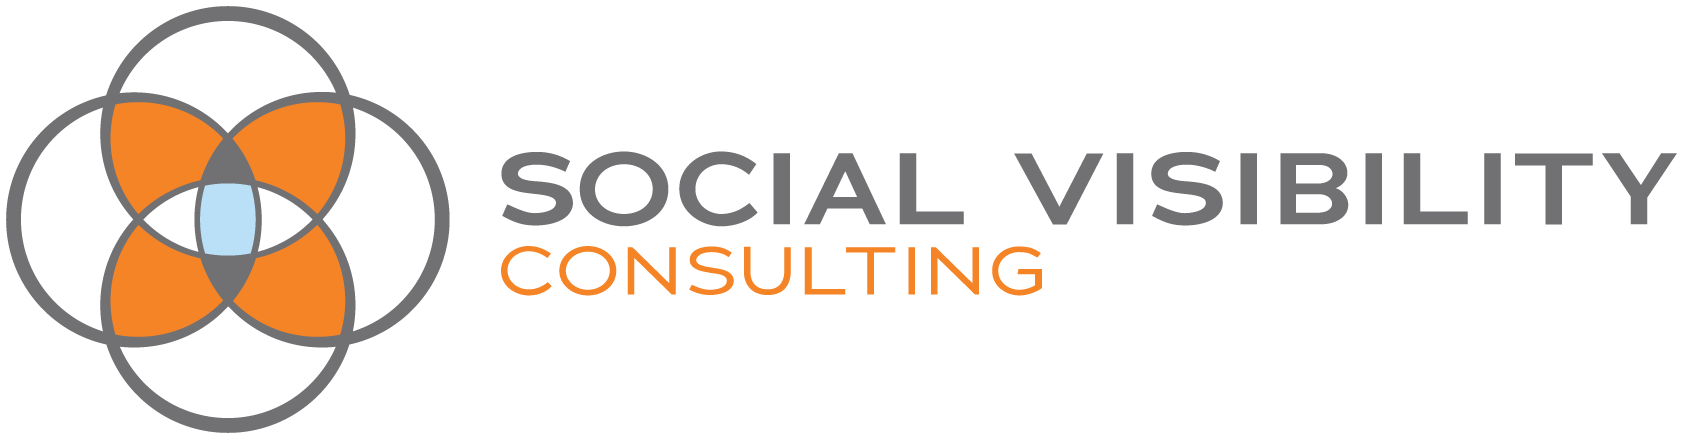 Social Visibility Consulting